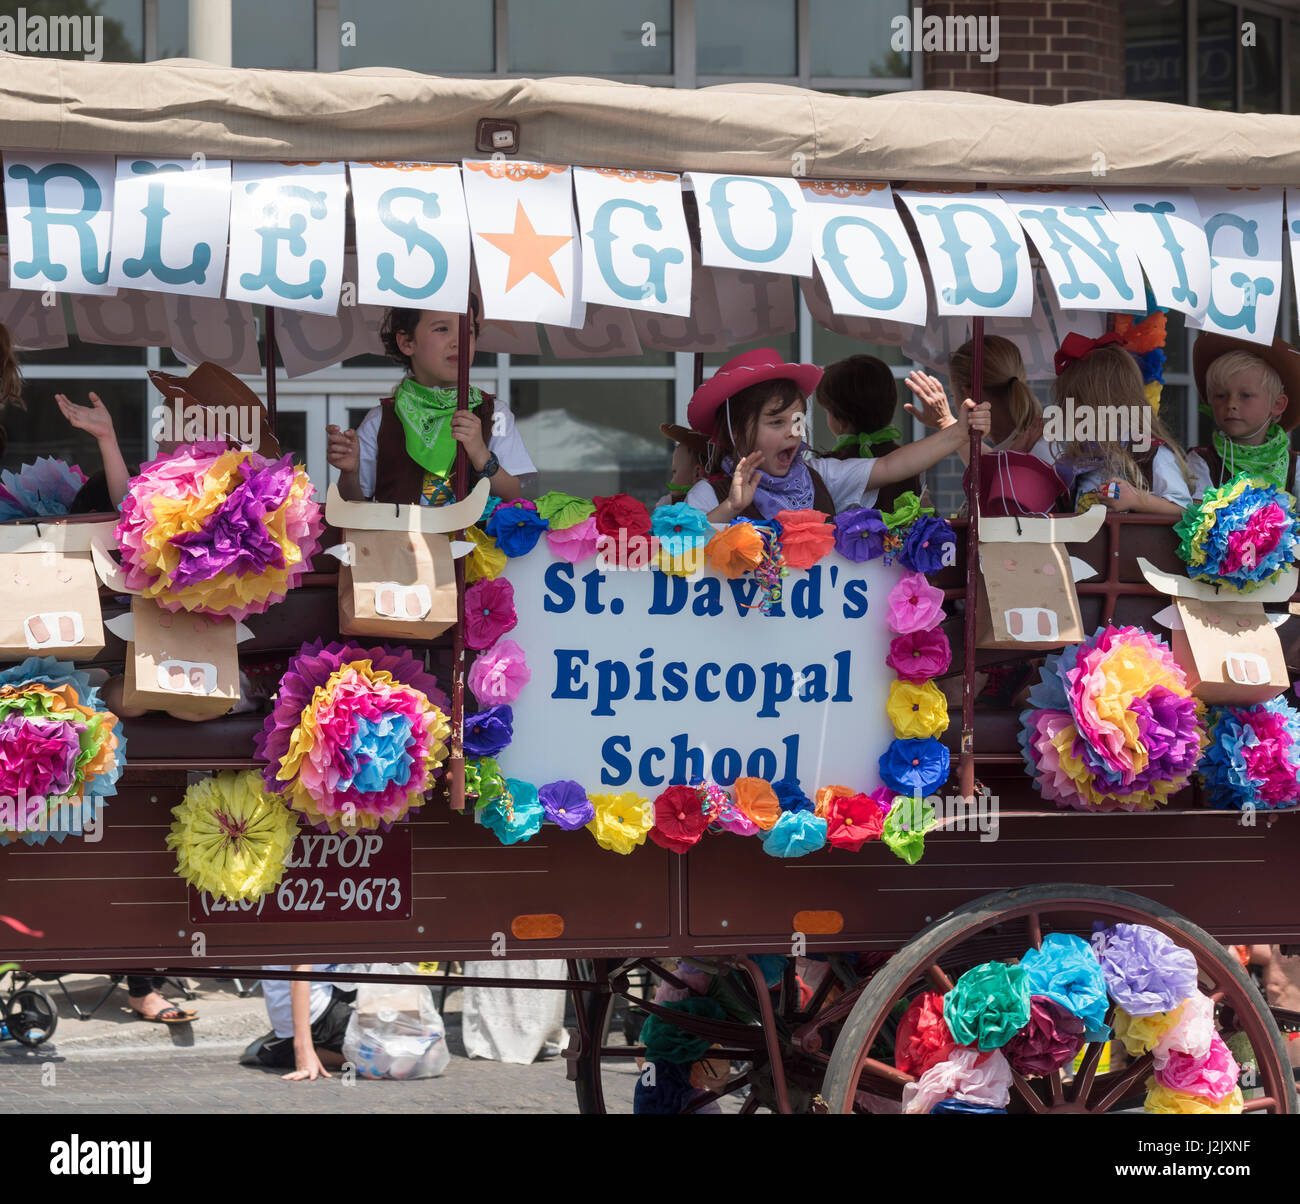 The Battle of Flowers Parade is the oldest event and largest parade of FiestaÂ® San Antonio attracting crowds of more than 350,000. It is the only parade in the United States produced entirely by women, all of whom are volunteers. Credit: David Rowlands/Alamy Live News Stock Photo